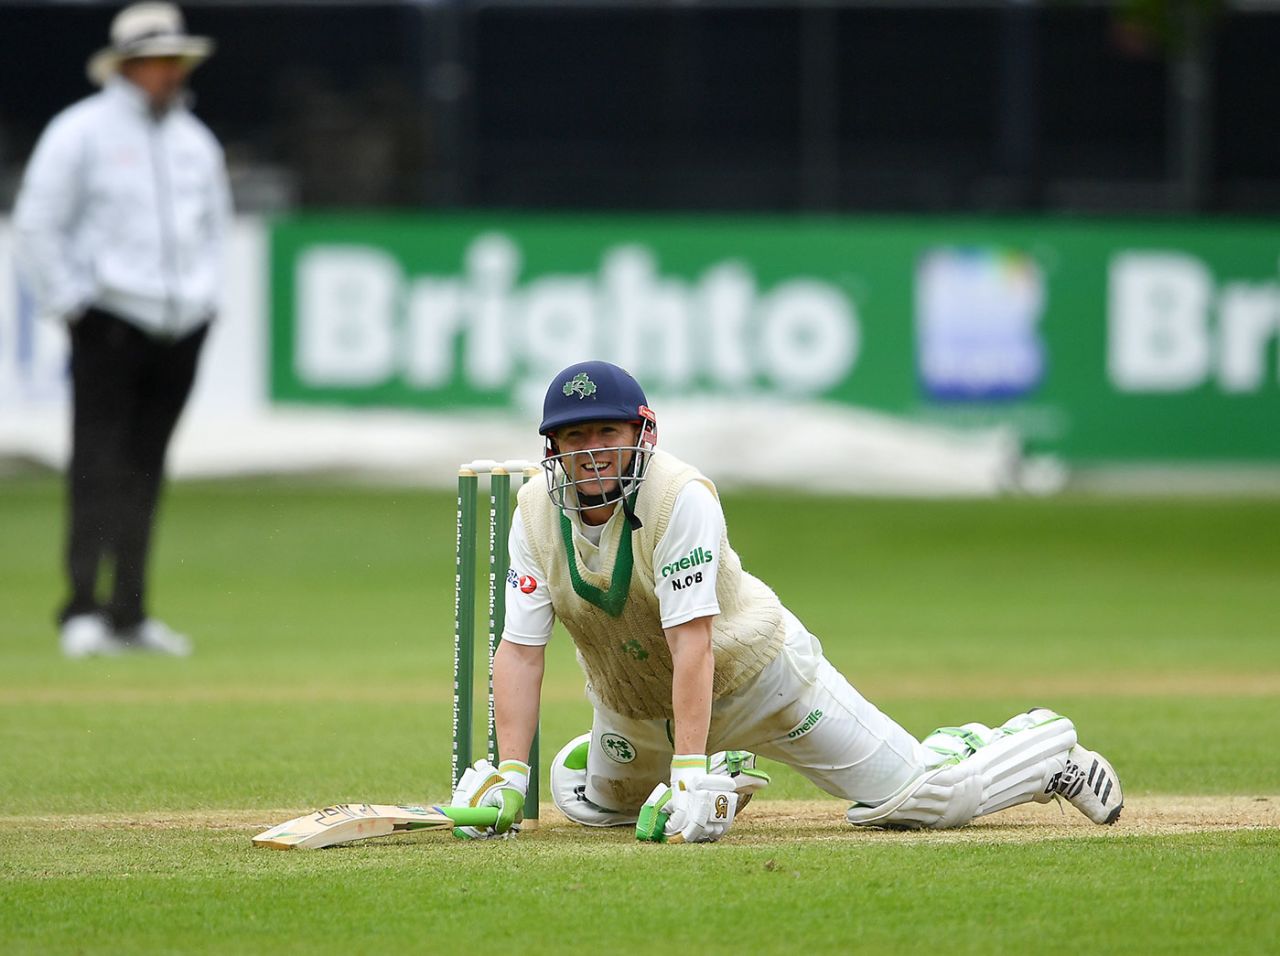 Niall O'Brien was almost run out for a pair, Ireland v Pakistan, Only Test, Malahide, 4th day, May 14, 2018